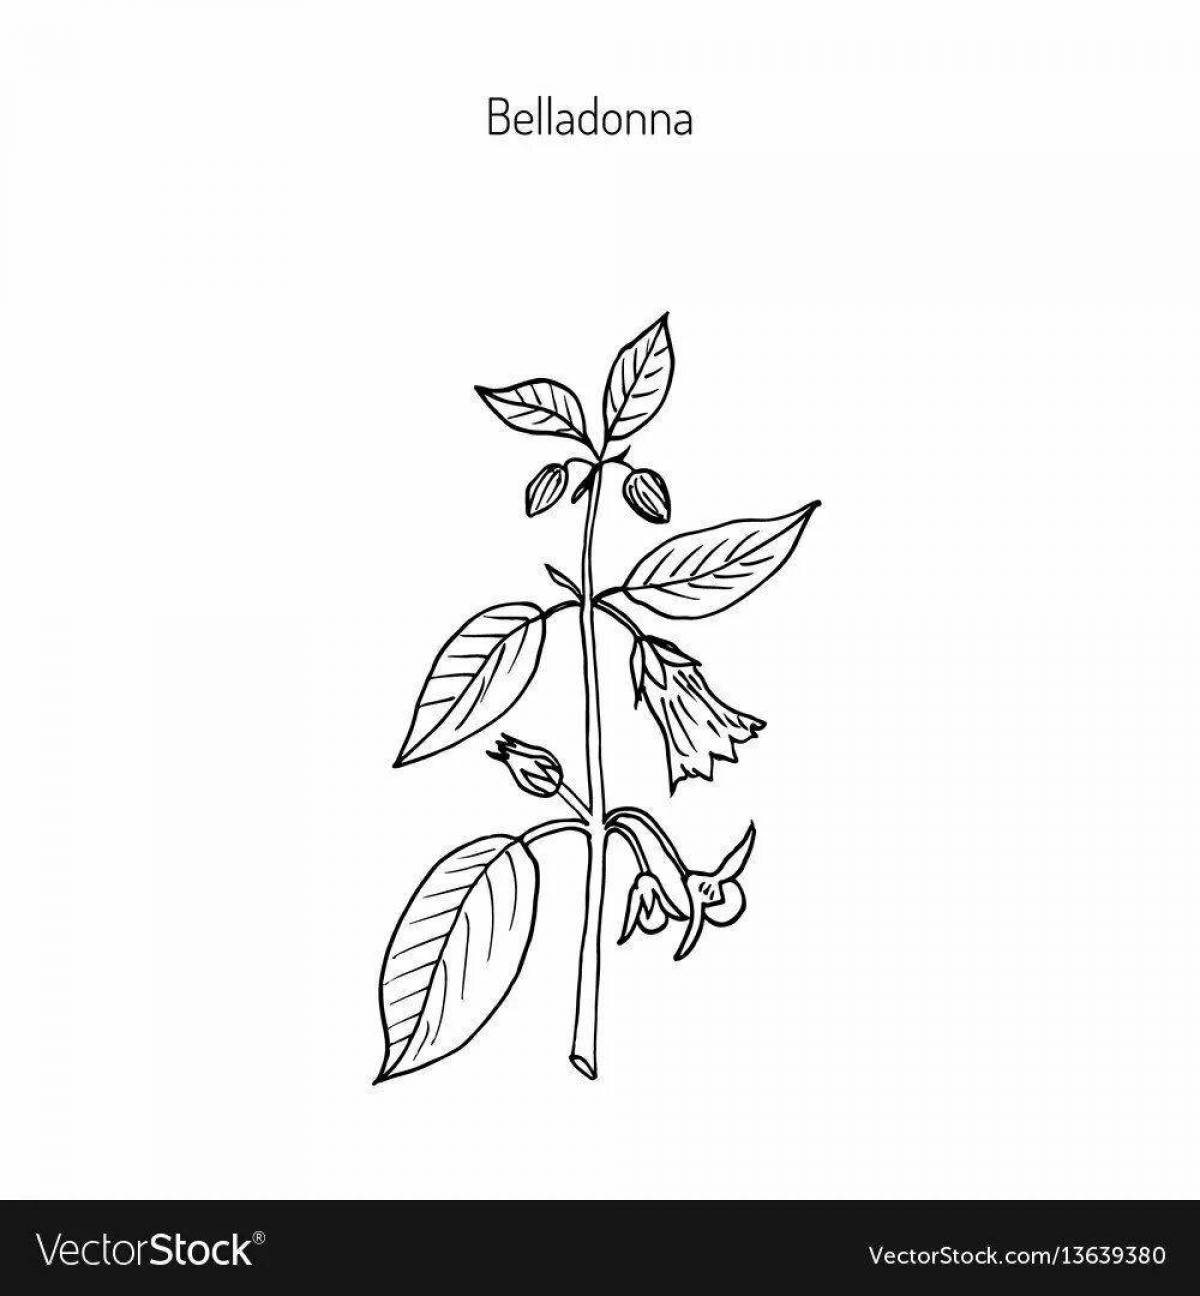 Coloring for bright poisonous plants for children